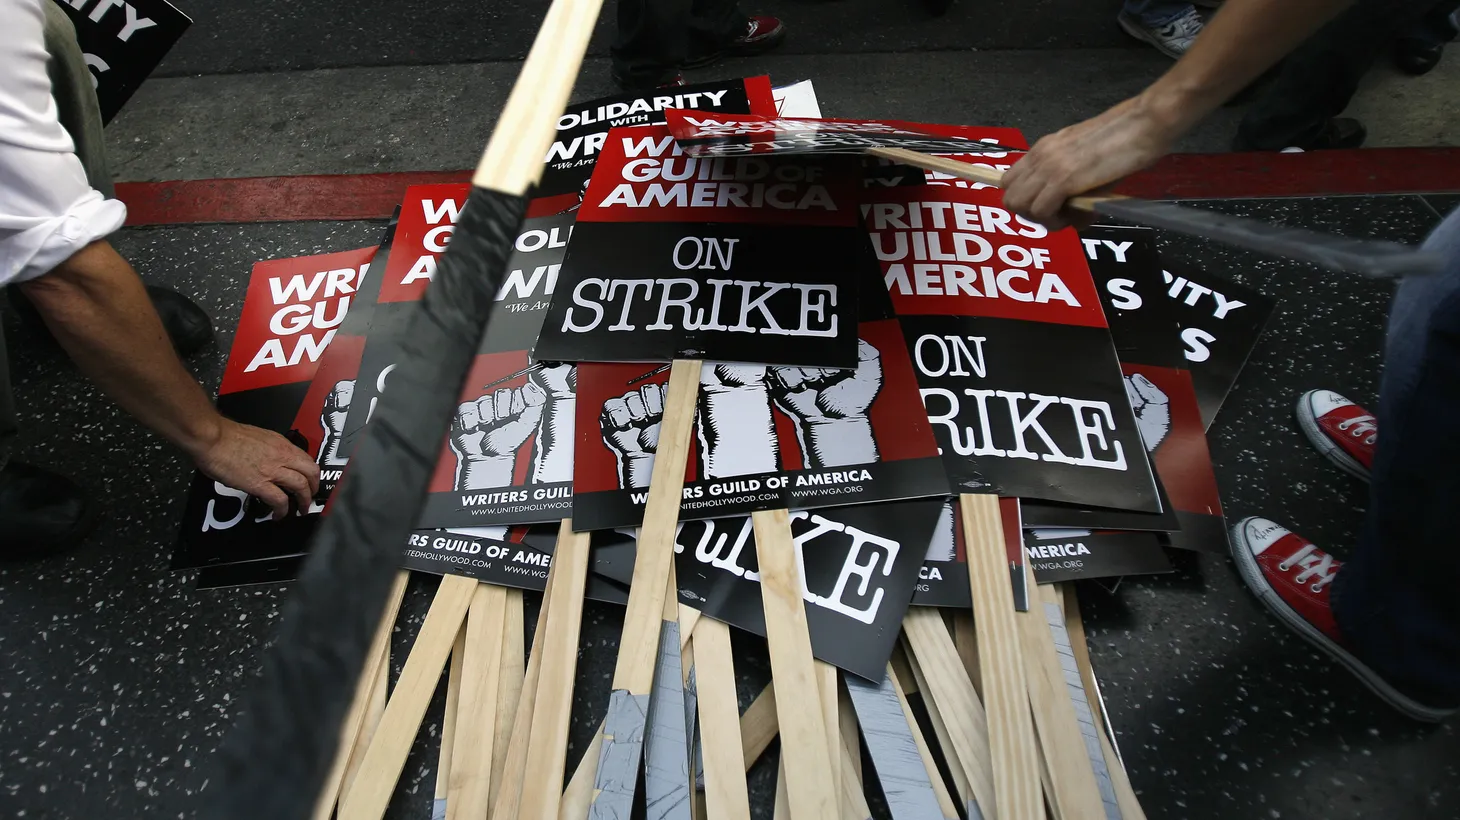 Writers Guild of America striking members pile up their signs at the end of a rally in West in Hollywood on November 20, 2007.